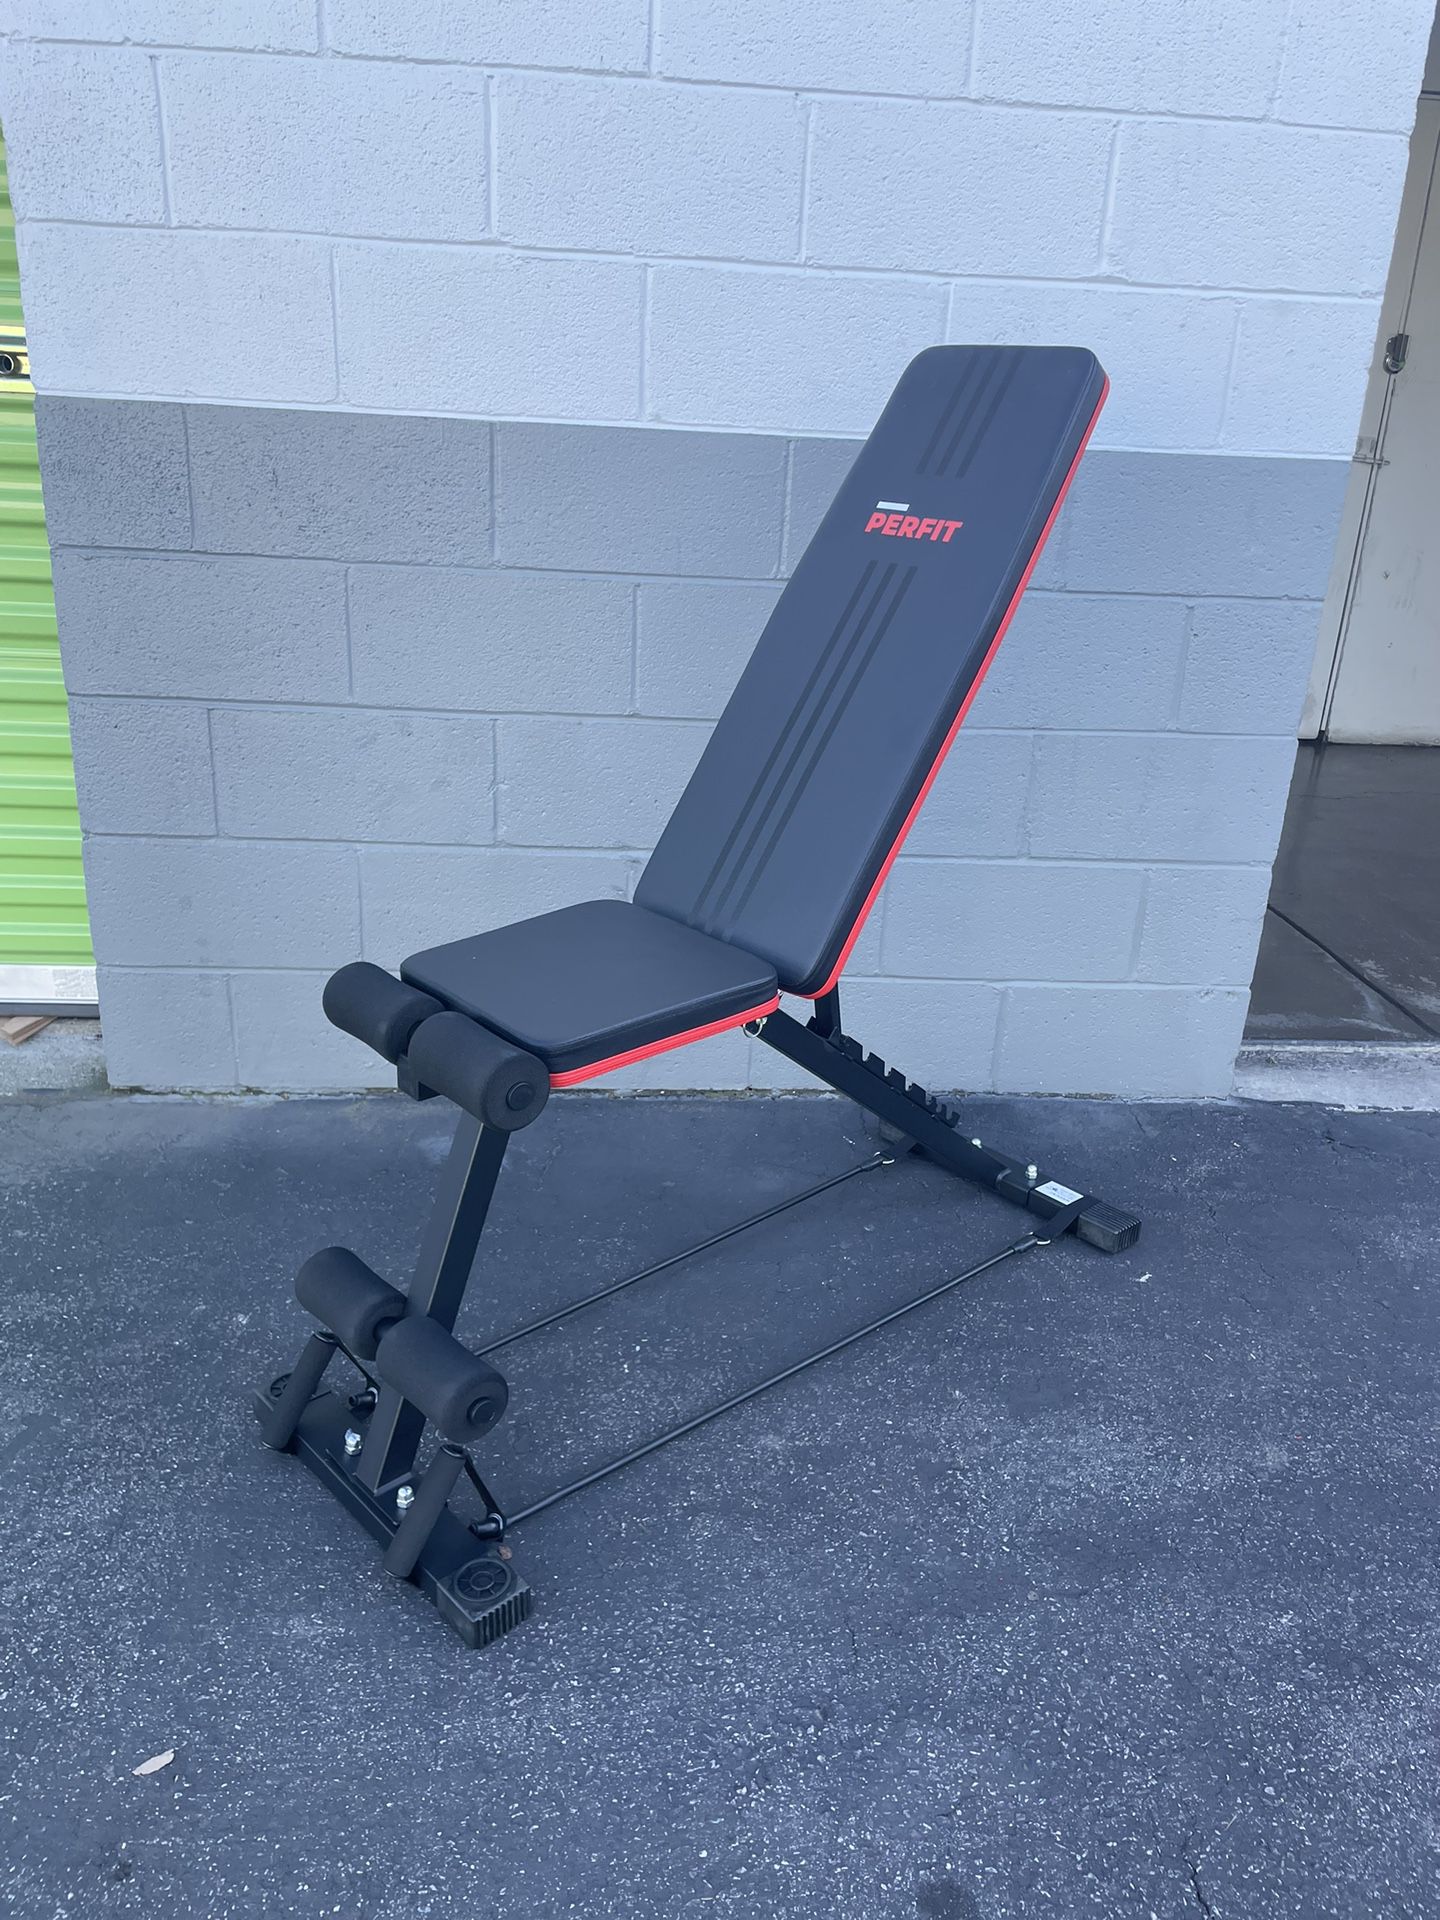 Adjustable Weight Bench New In Box!! Many Available!! 